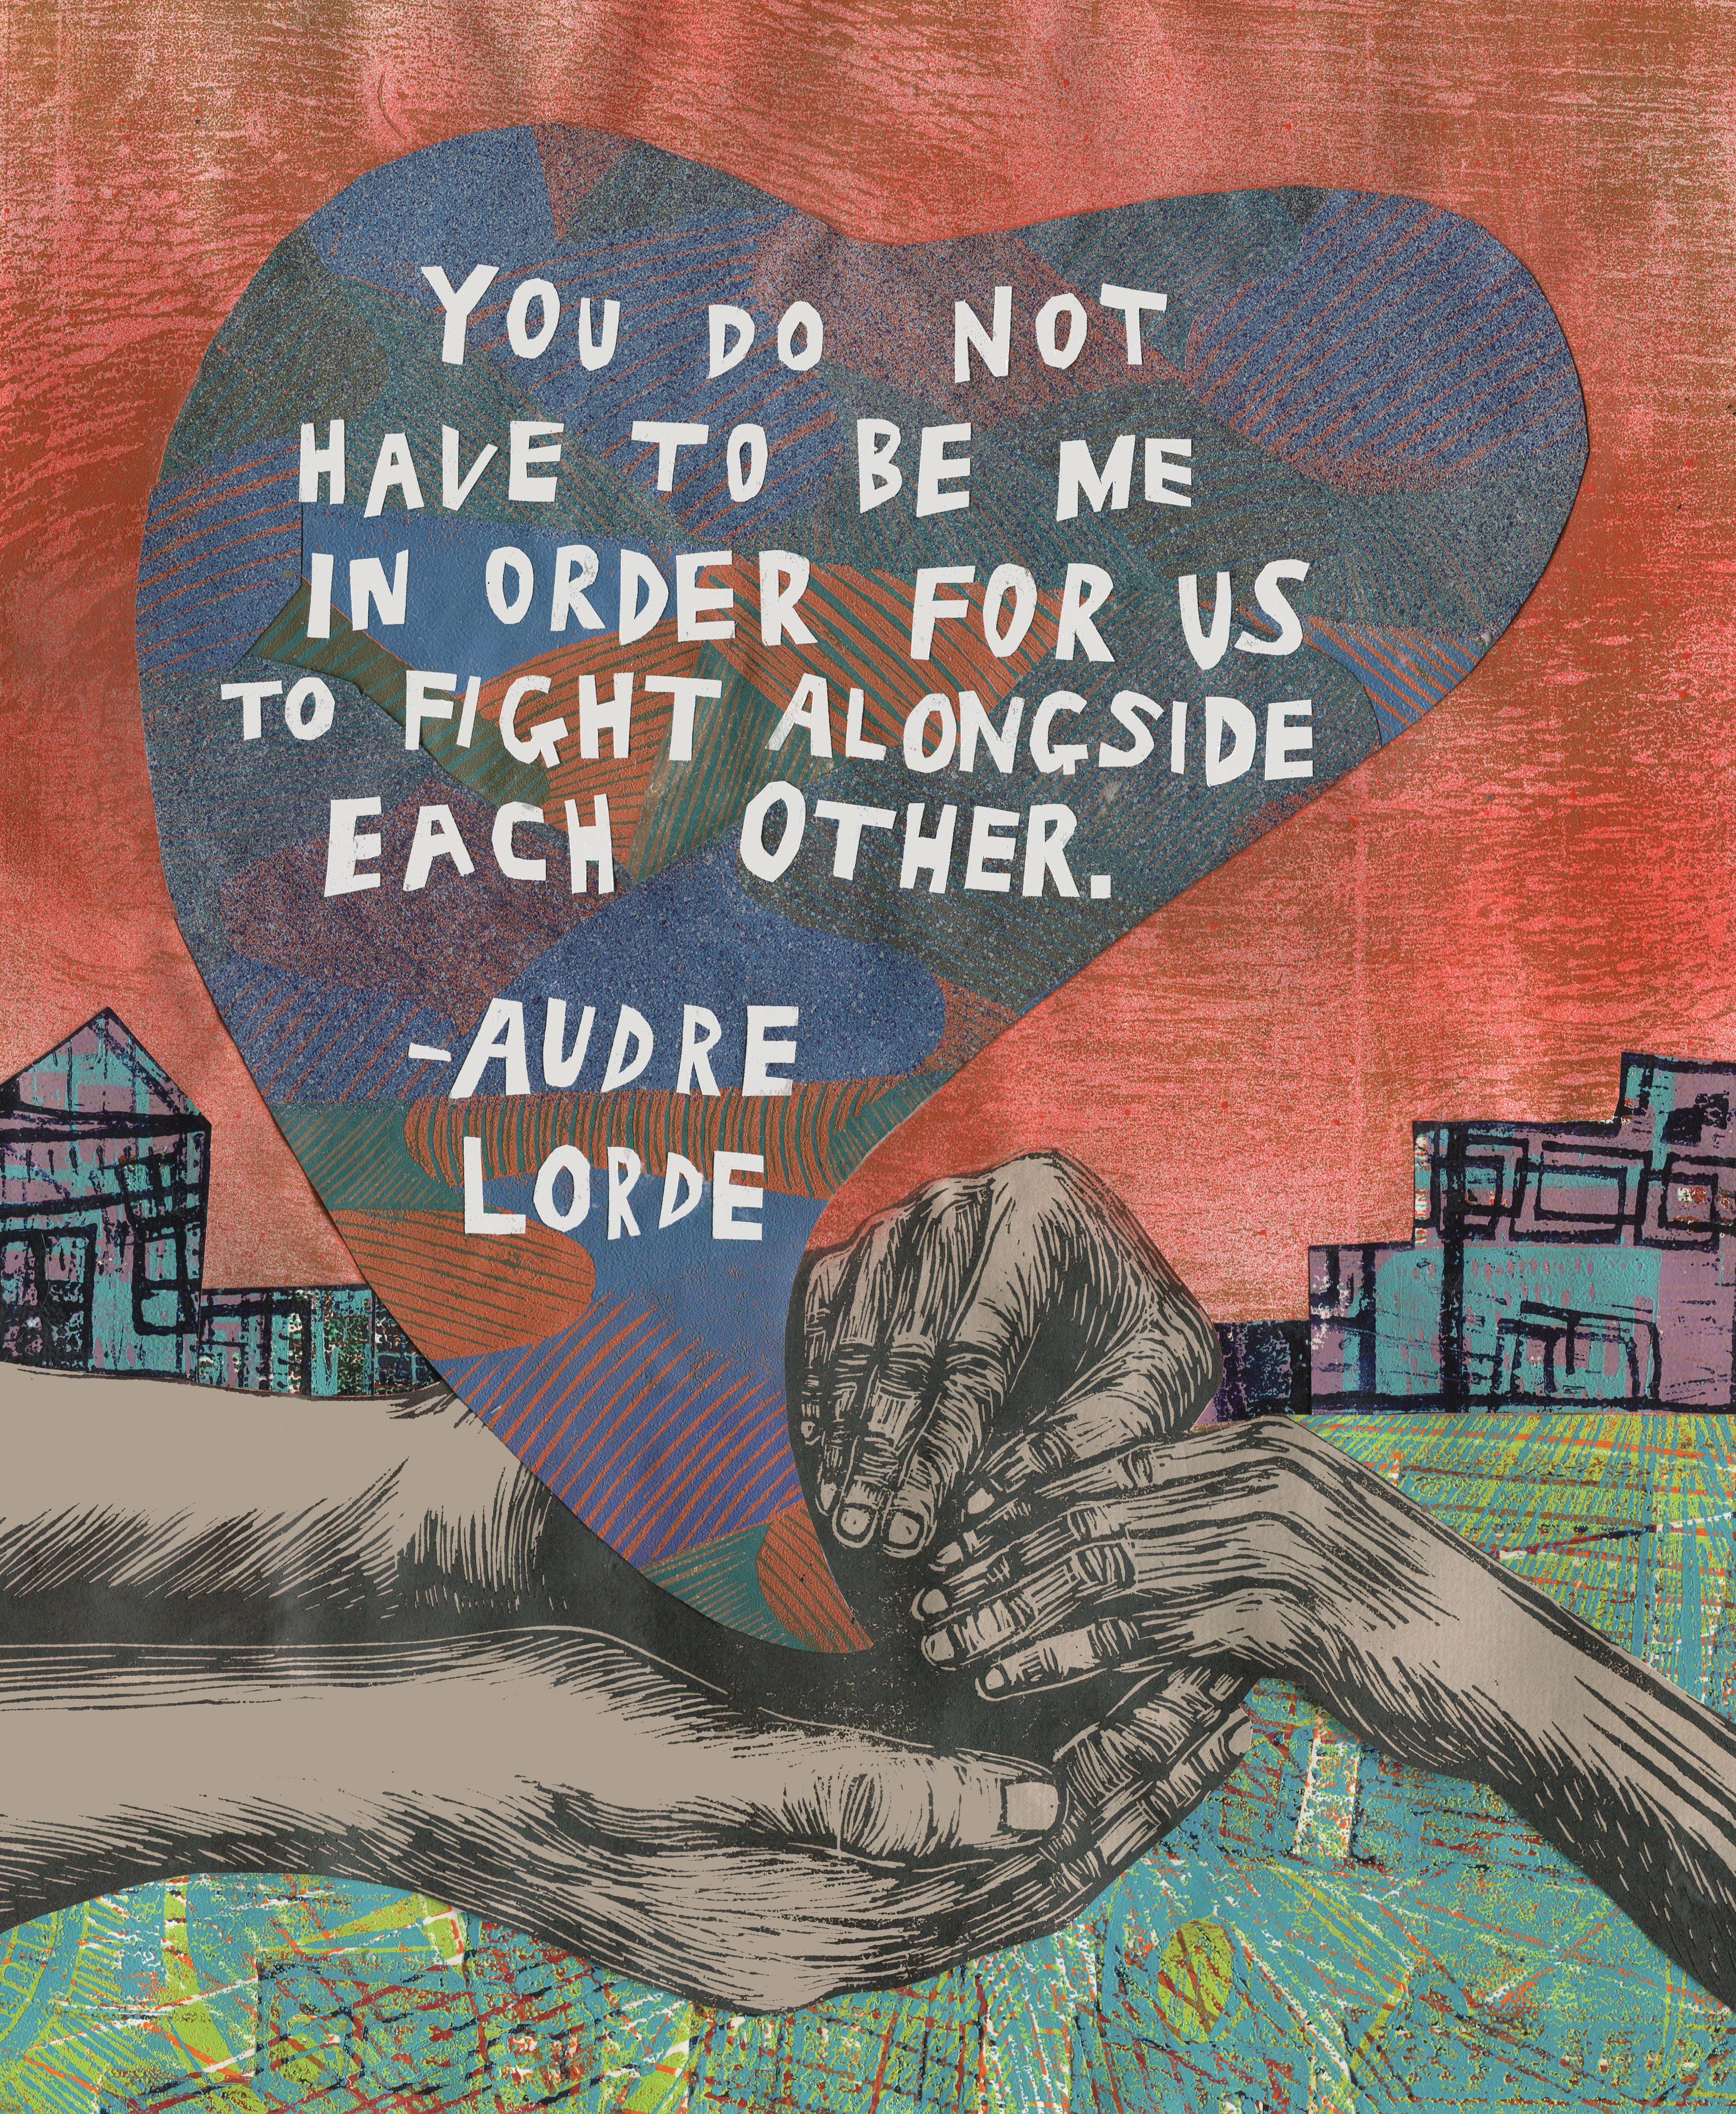 Audre Lorde, Quote, One World, Poster, TT61, Magazine, Spring, 2019